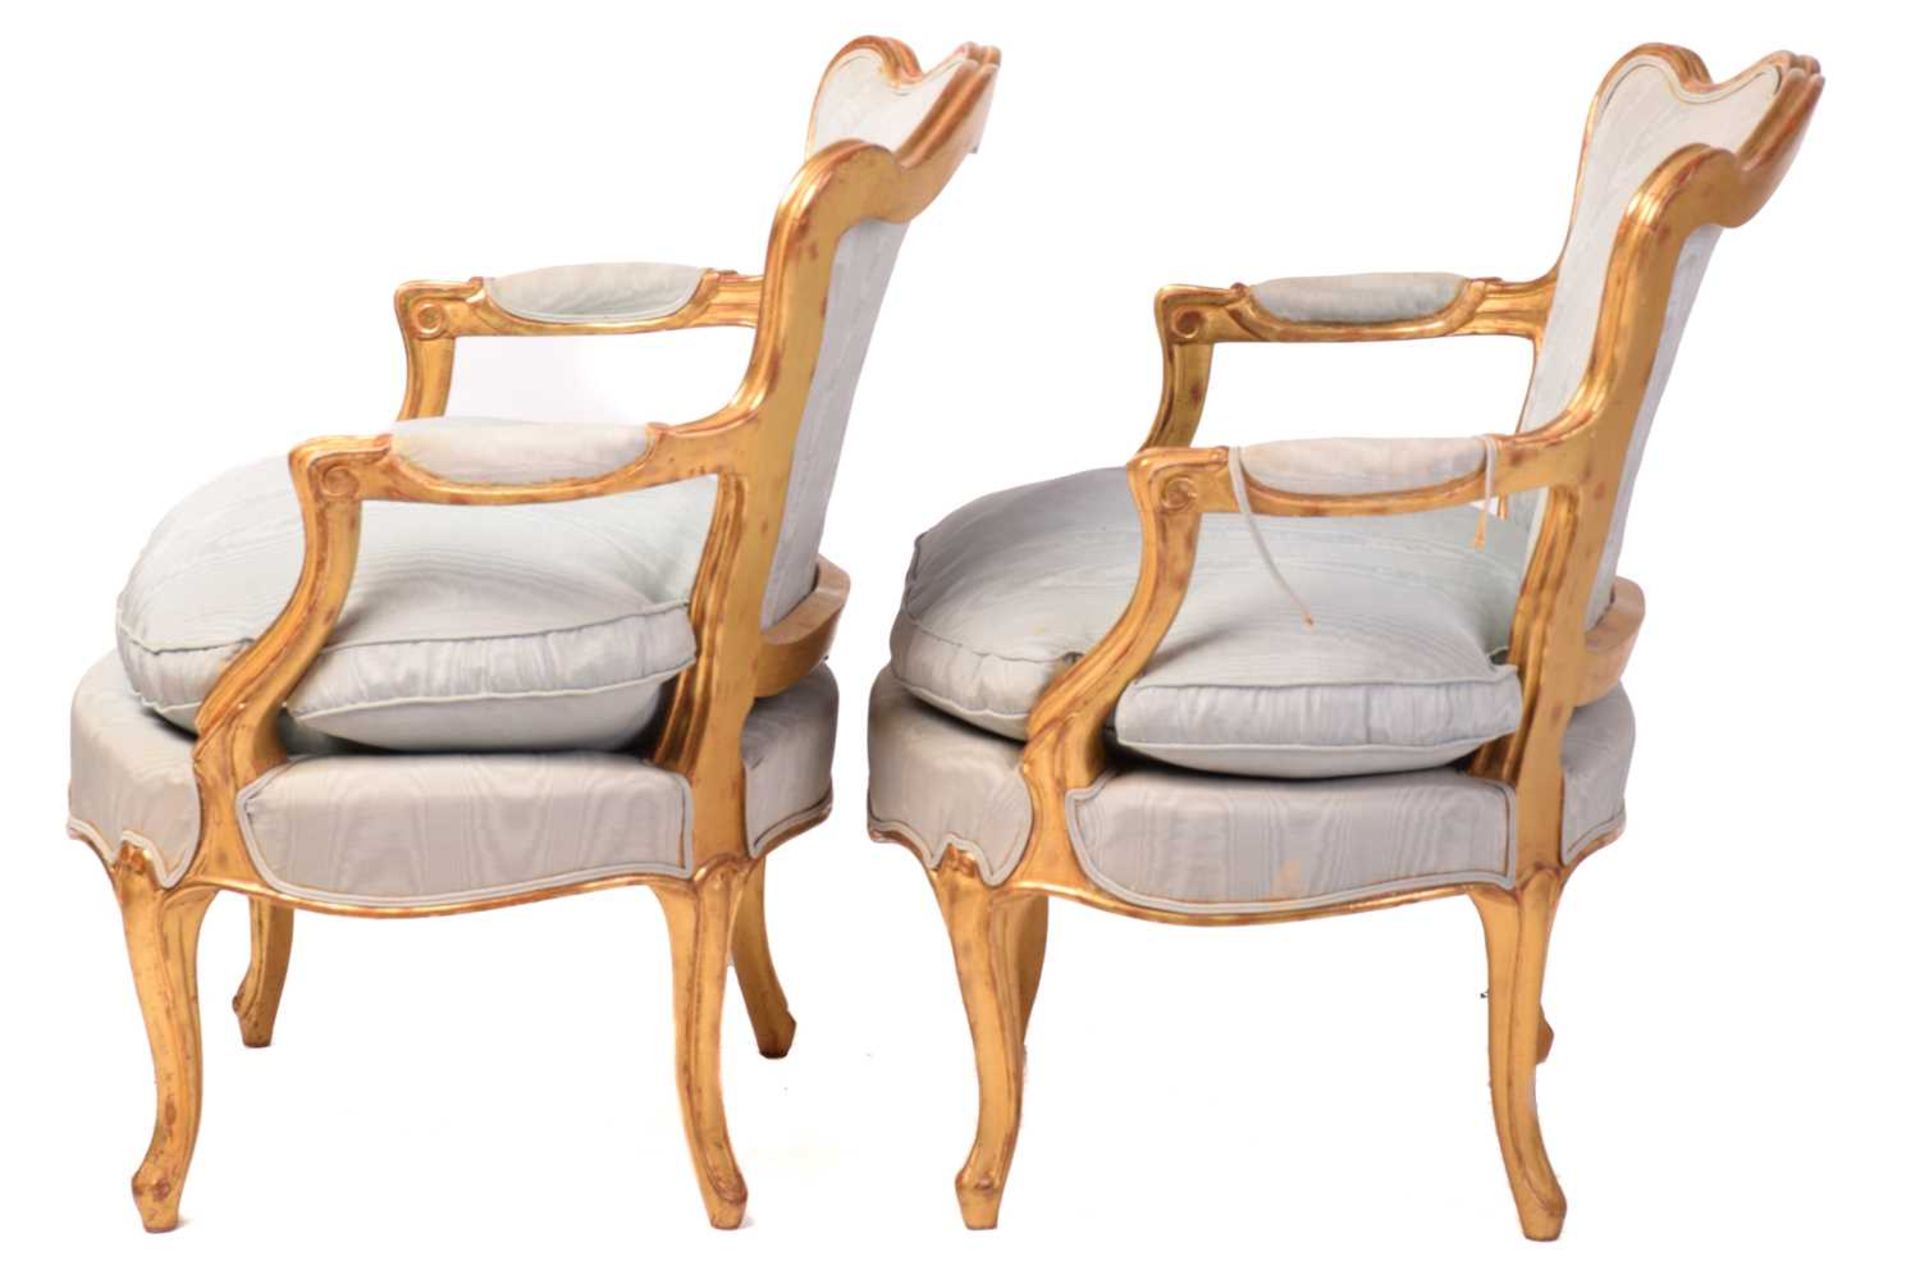 A pair of French Louis XV-style carved wood and gilt gesso fauteuils, 20th century with serpentine - Image 6 of 7